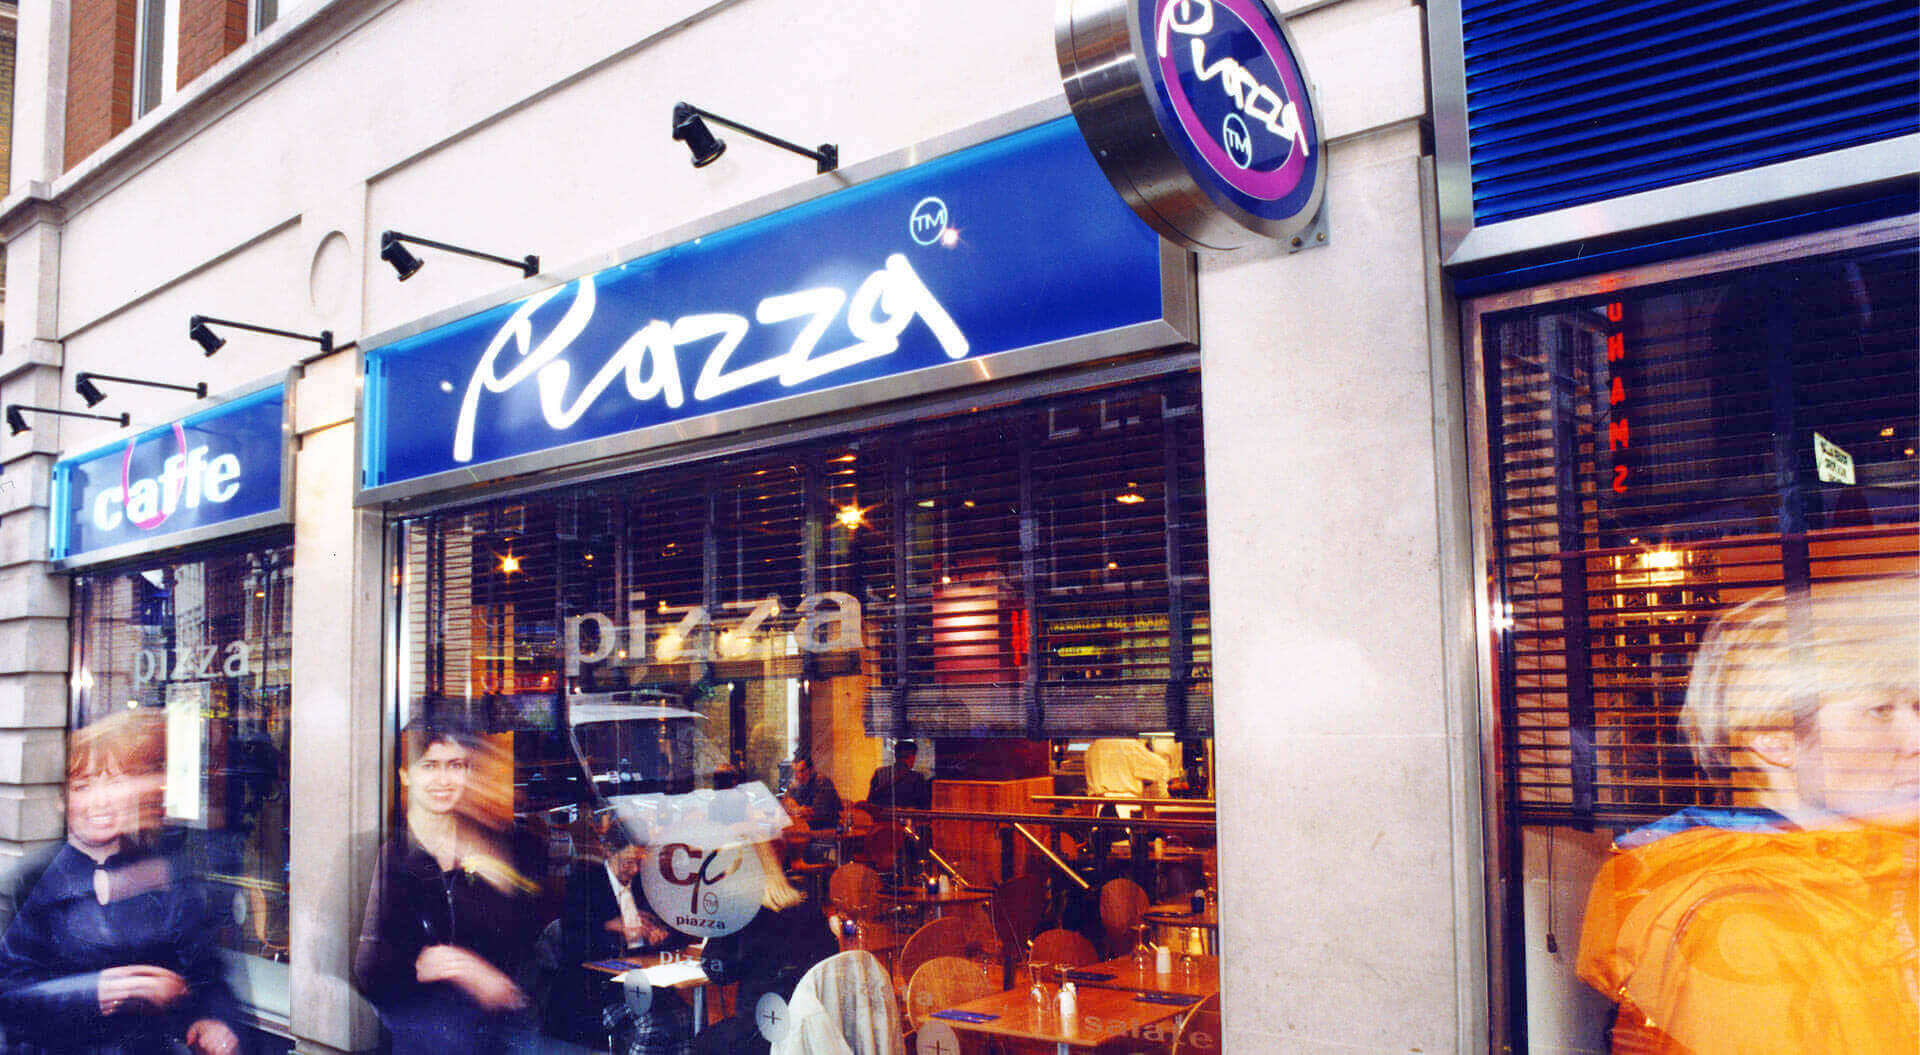 Caffe Piazza brand identity and interior design for a restaurant, 